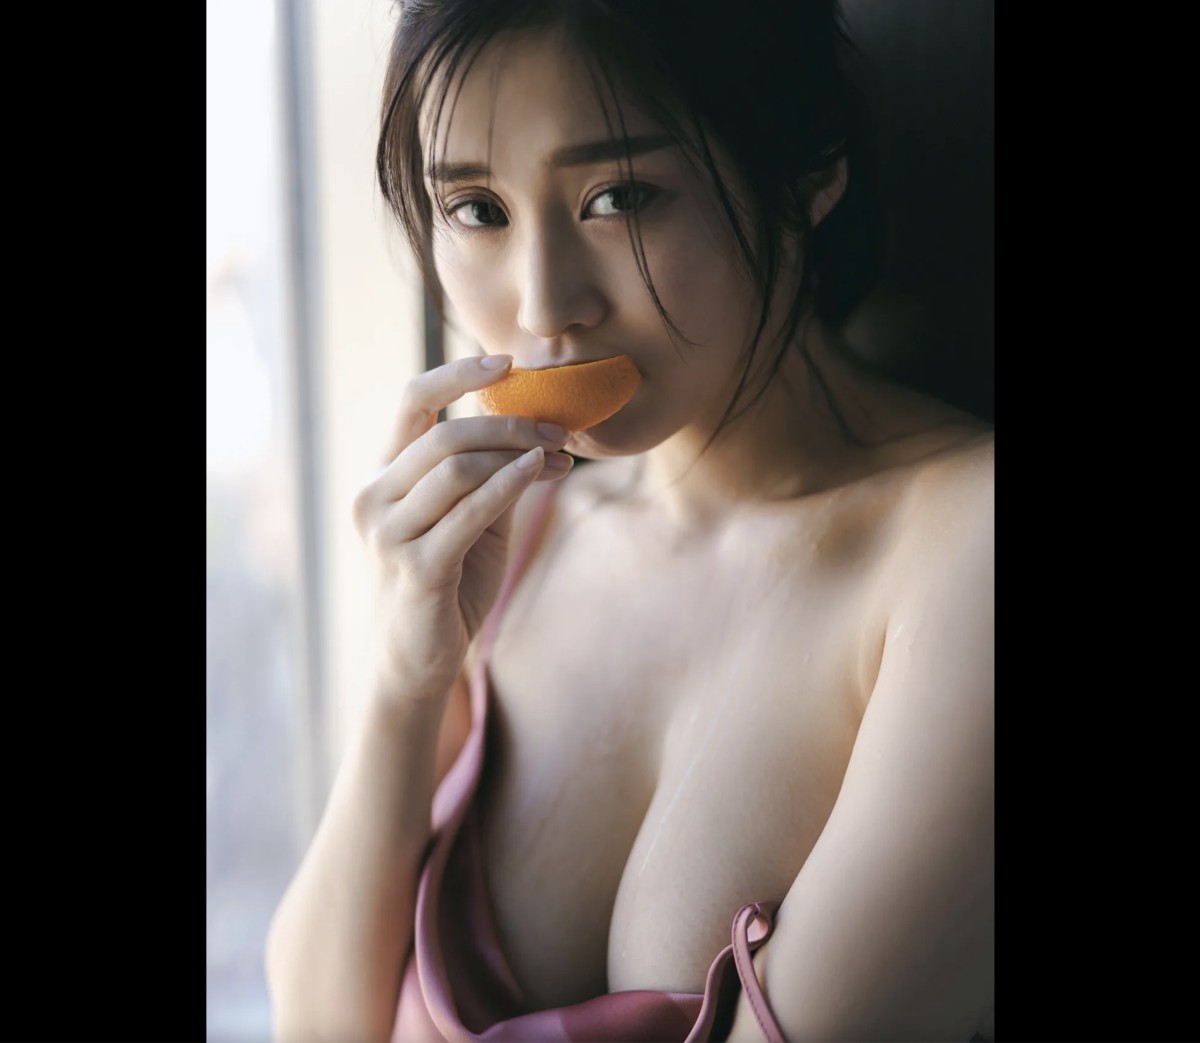 FRIDAYデジタル写真集 2023 02 09 Rin Takahashi 高橋凛 In A Suite Room With An I cup Beauty 0006 8250966281.jpg